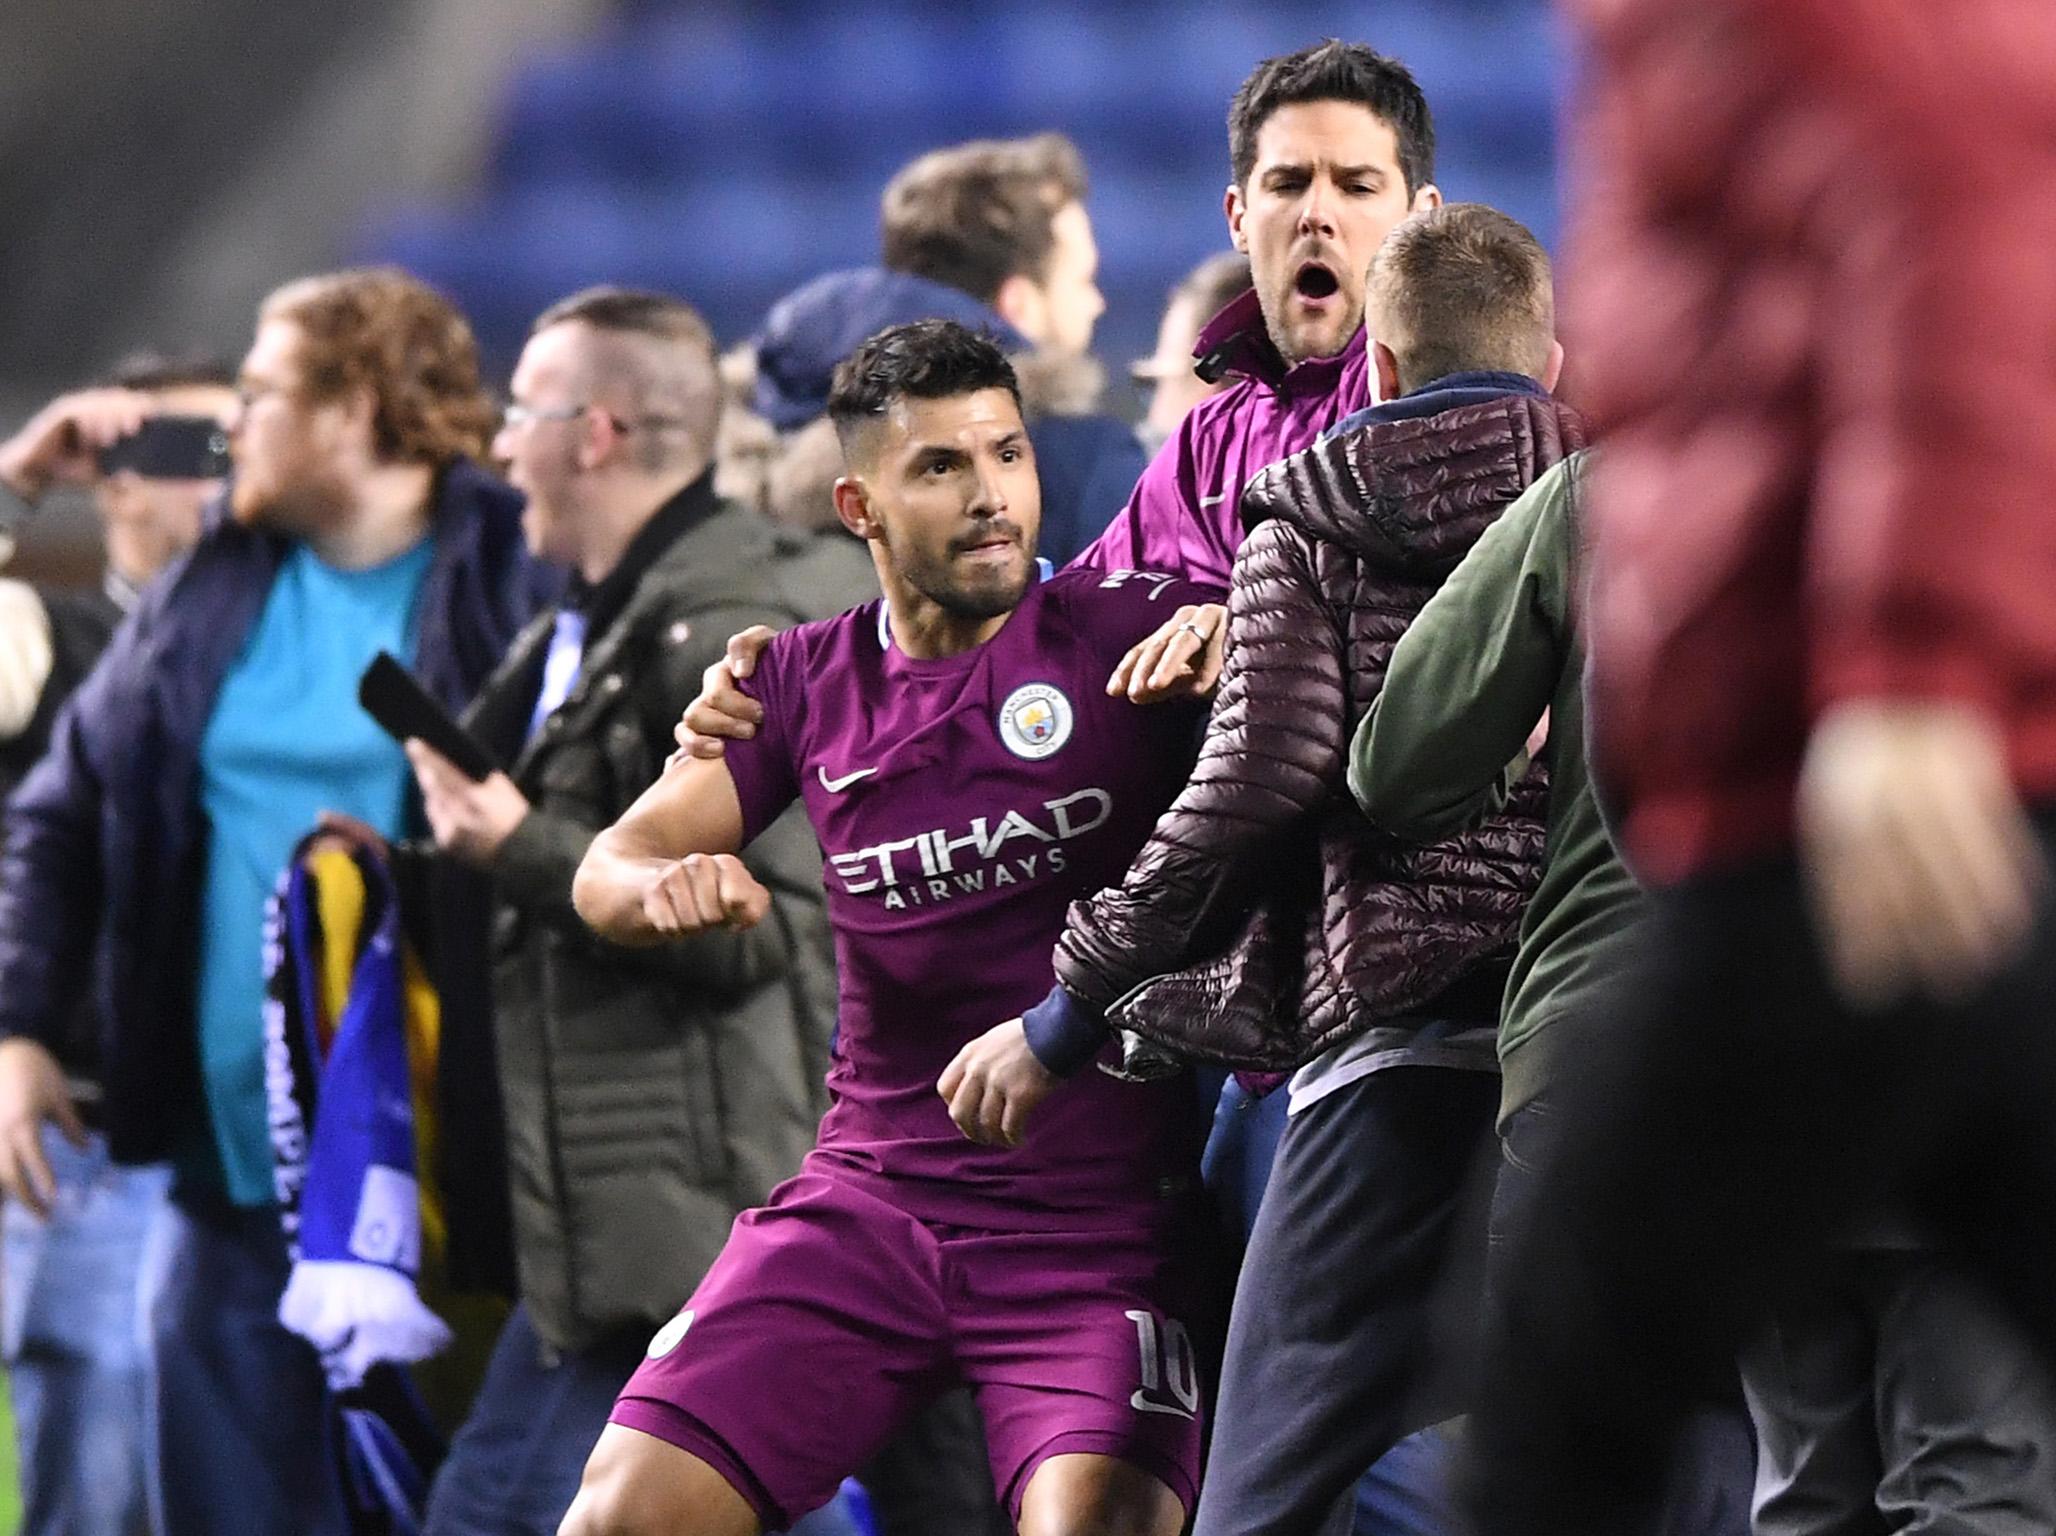 Sergio Aguero got in a scuffle with fans after full-time